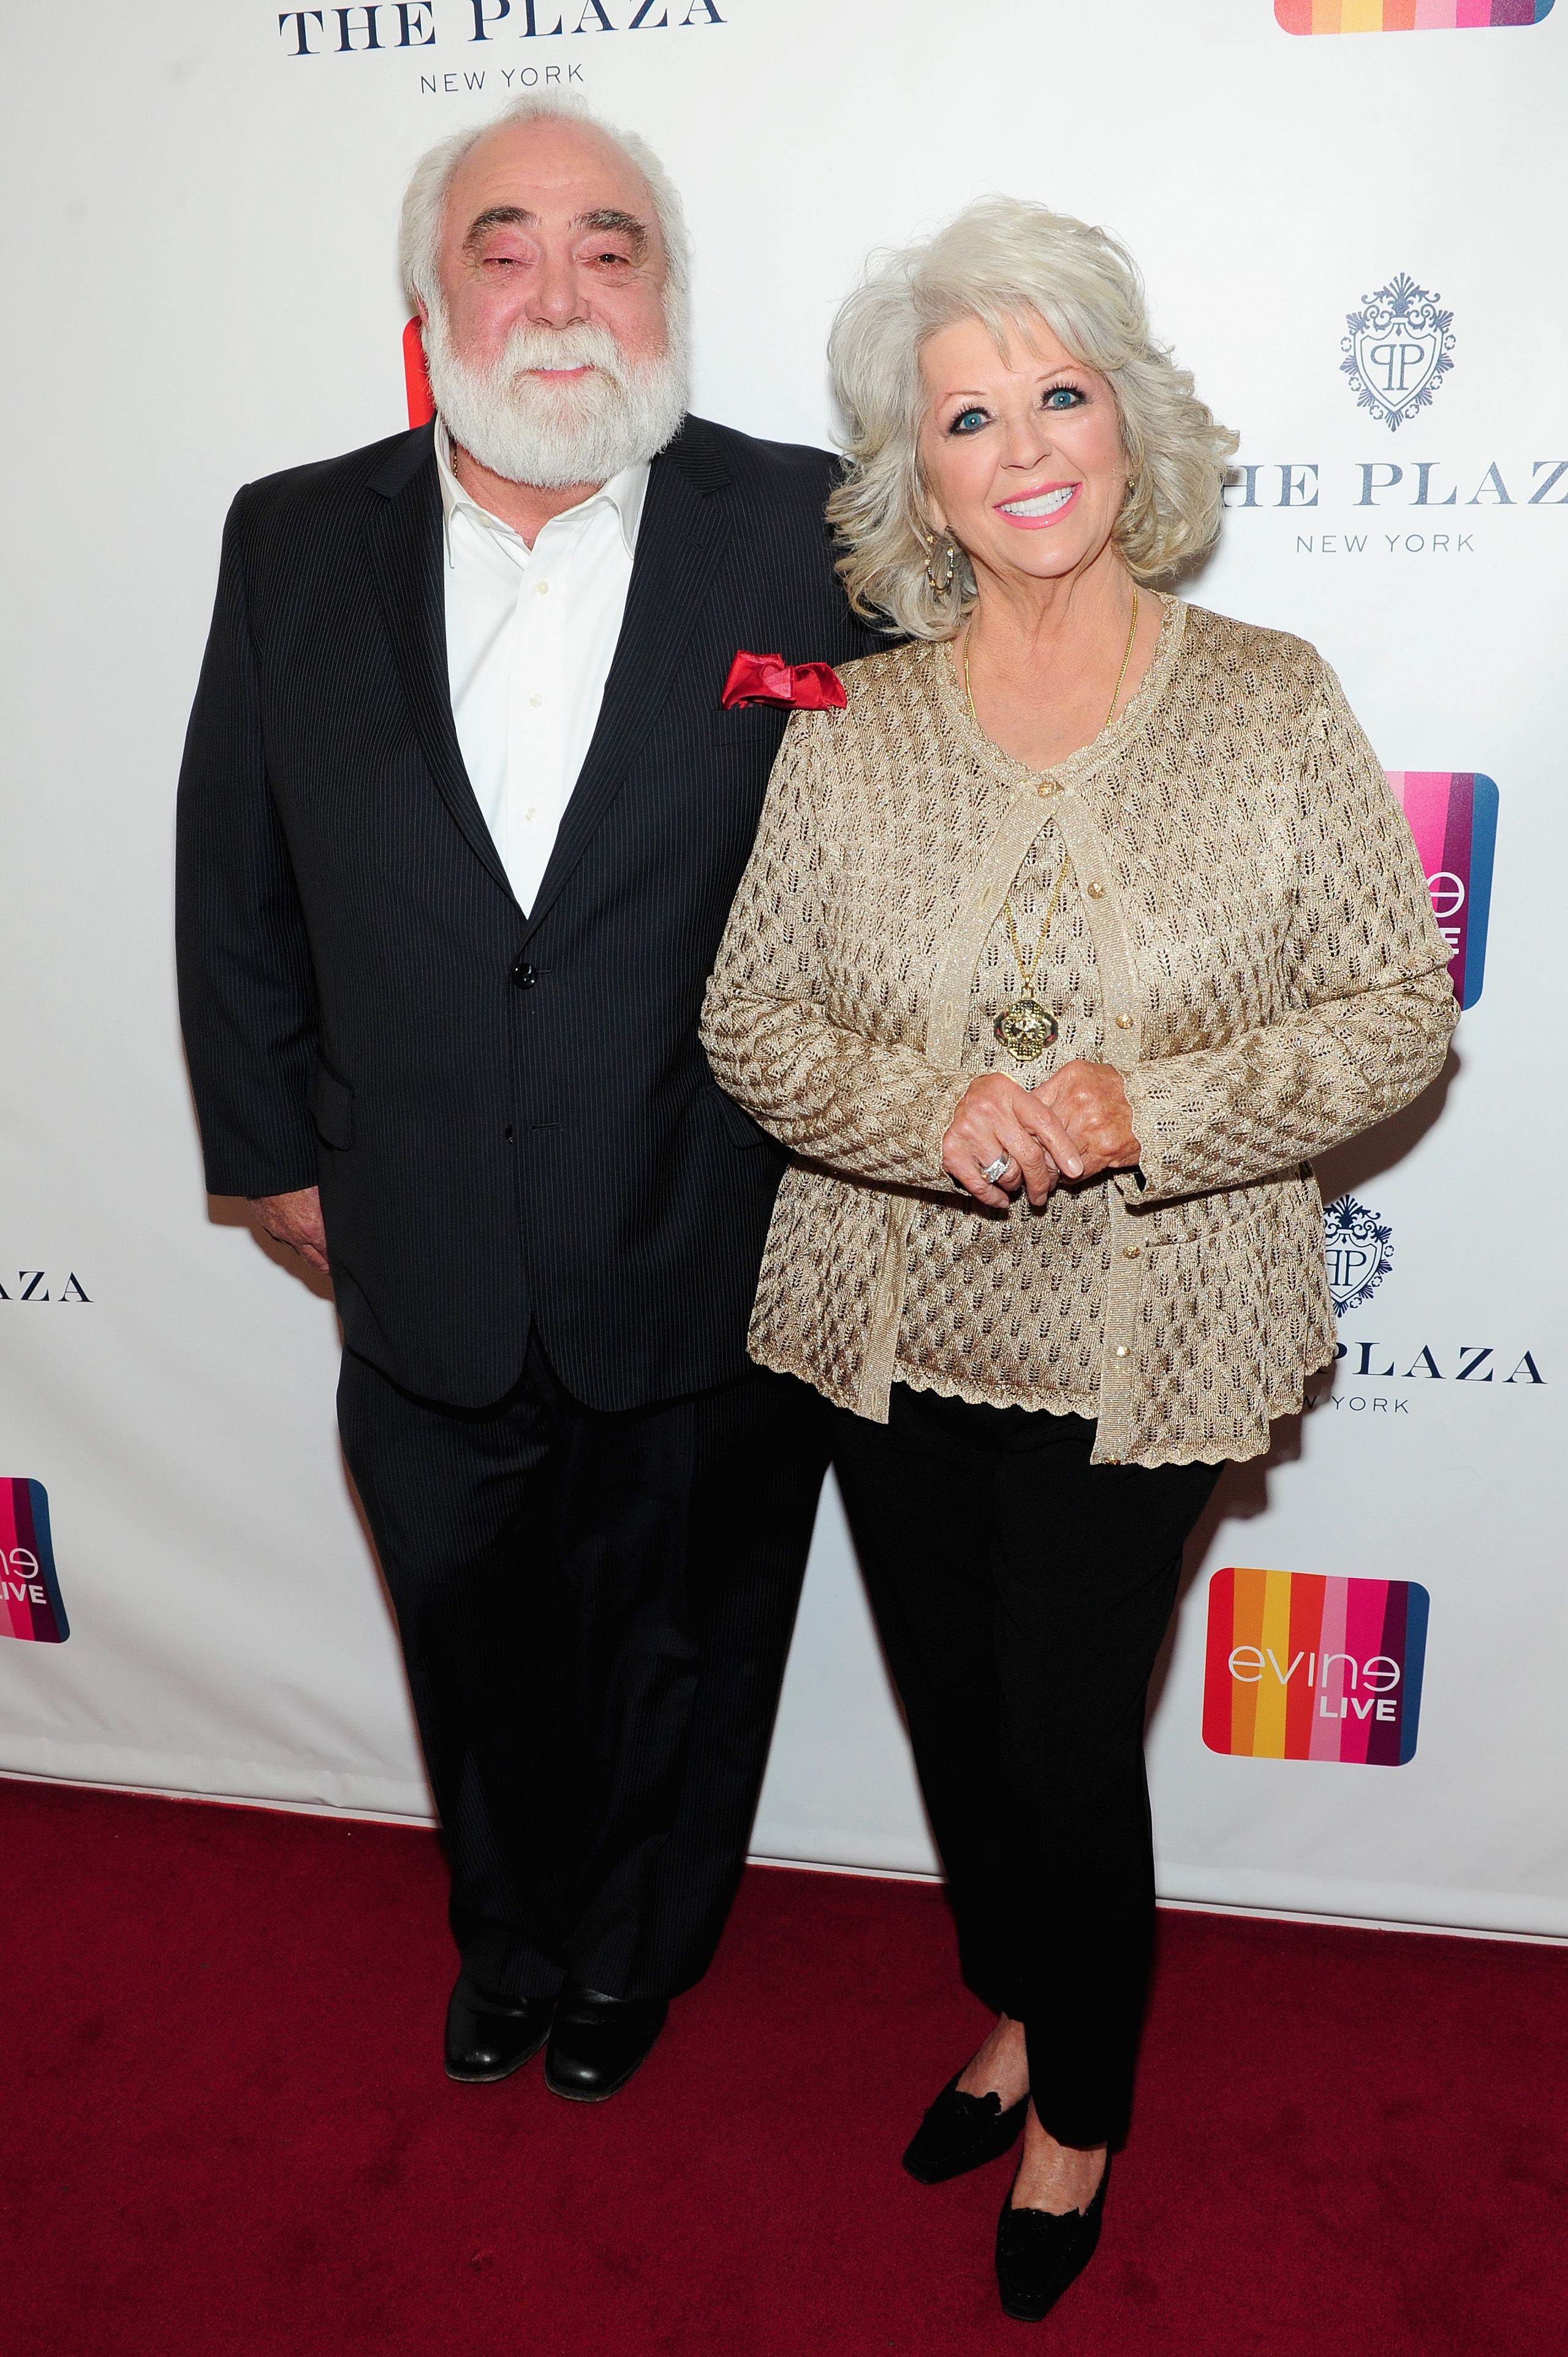 Who Is Paula Deen's Husband - Who Is Michael Groover